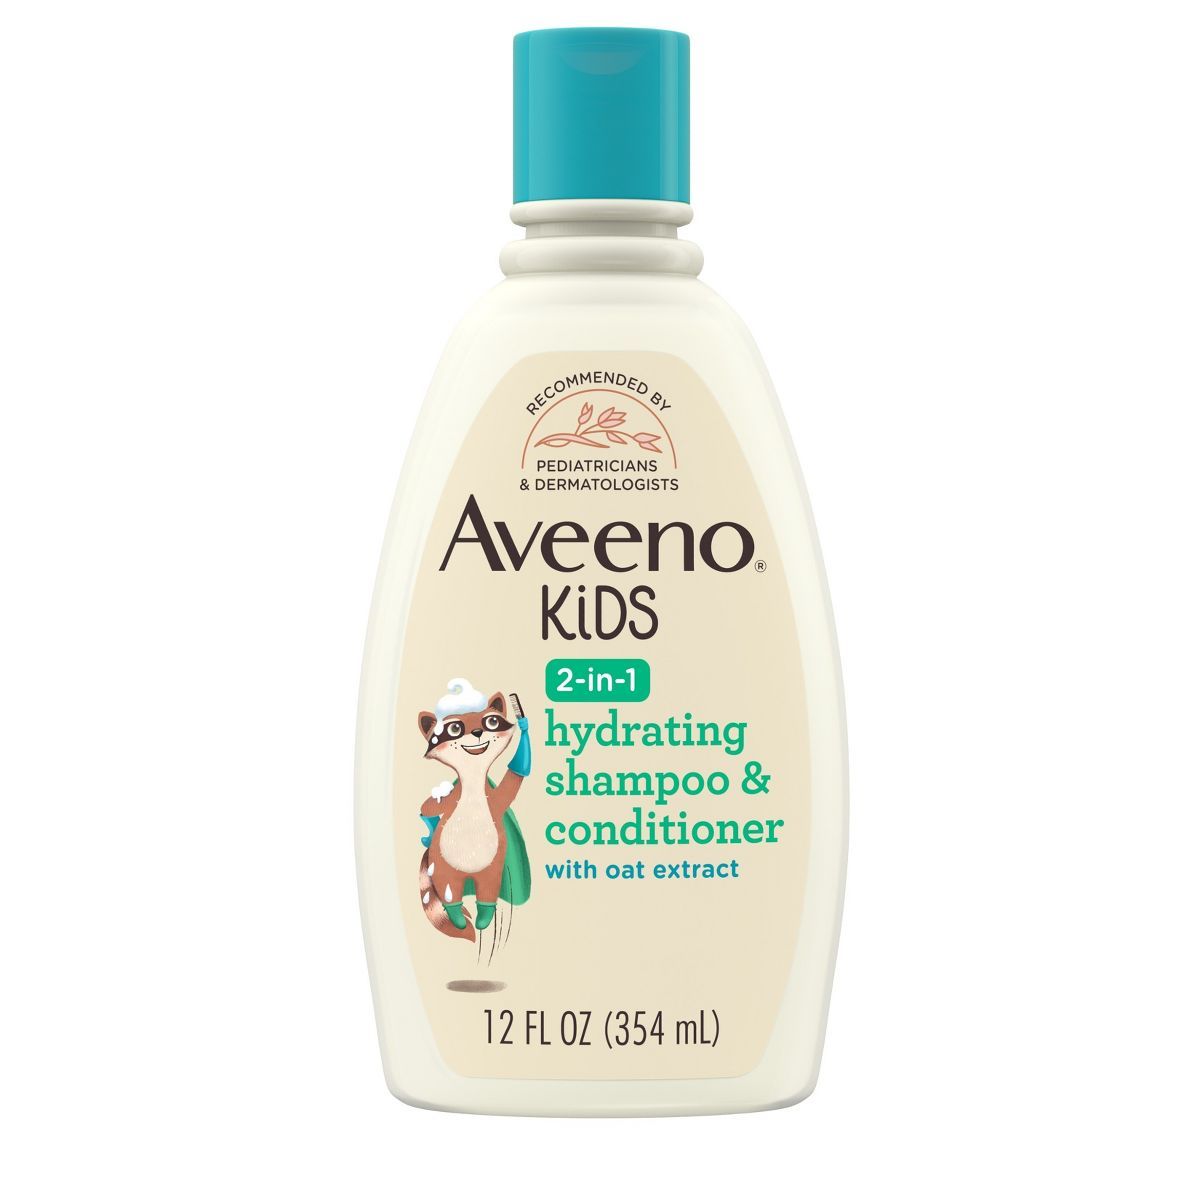 Aveeno Kids 2-in-1 Hydrating Shampoo & Conditioner, Gently Cleanses, Conditions & Detangles Kids ... | Target